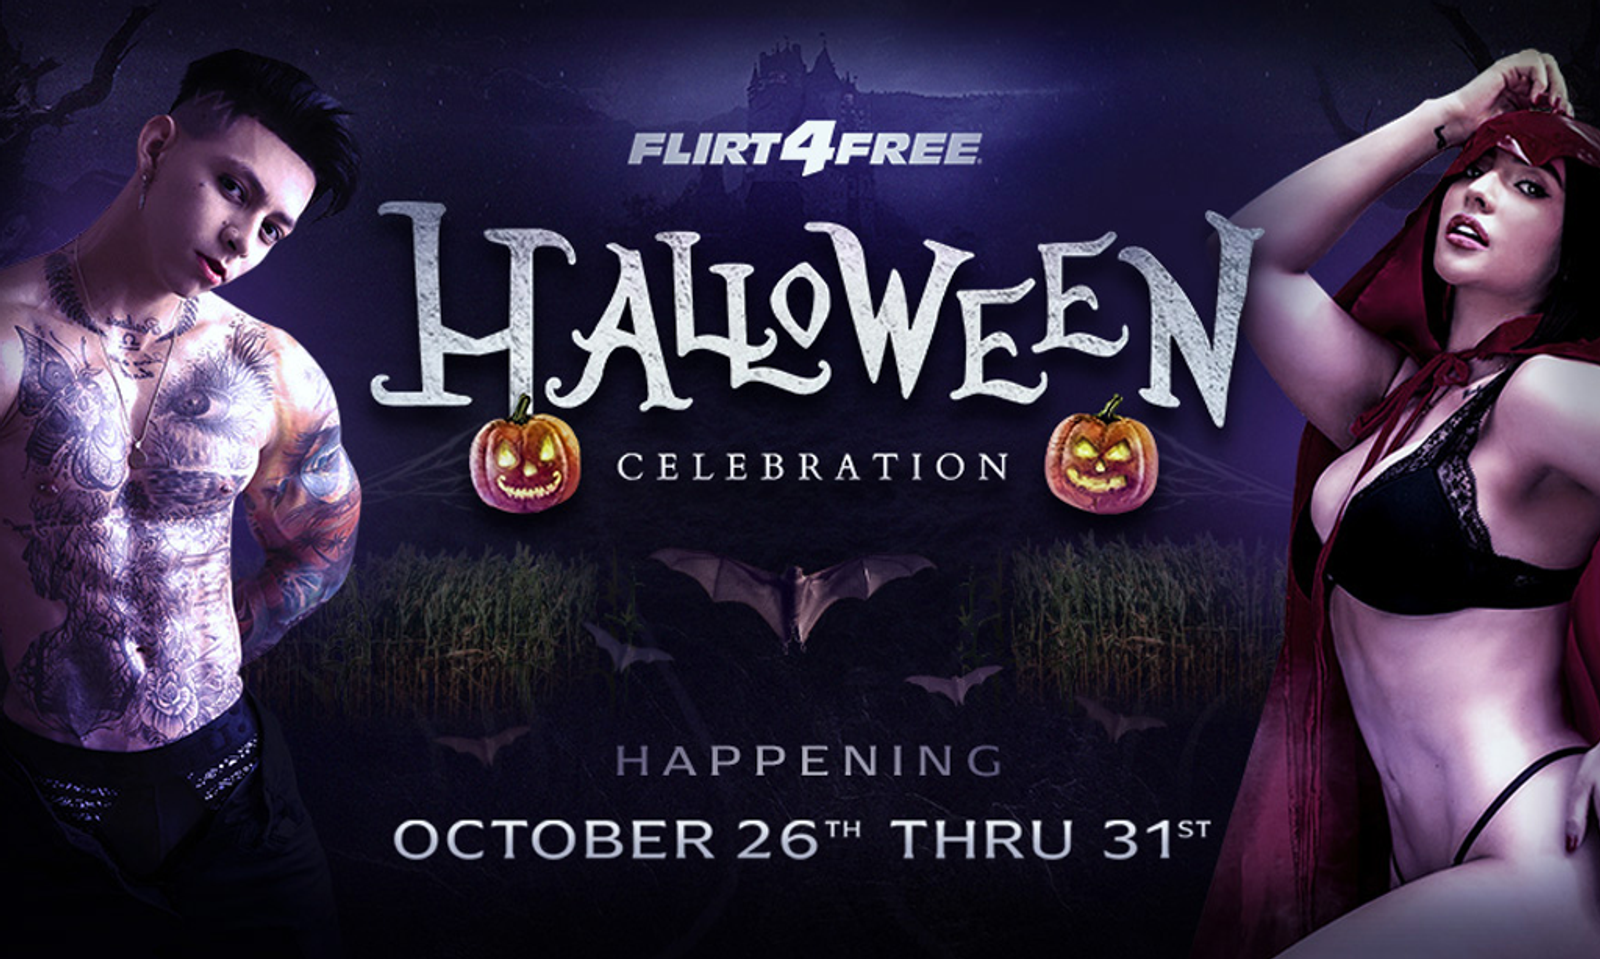 Flirt4Free to Host Halloween Contests With $20K in Prizes